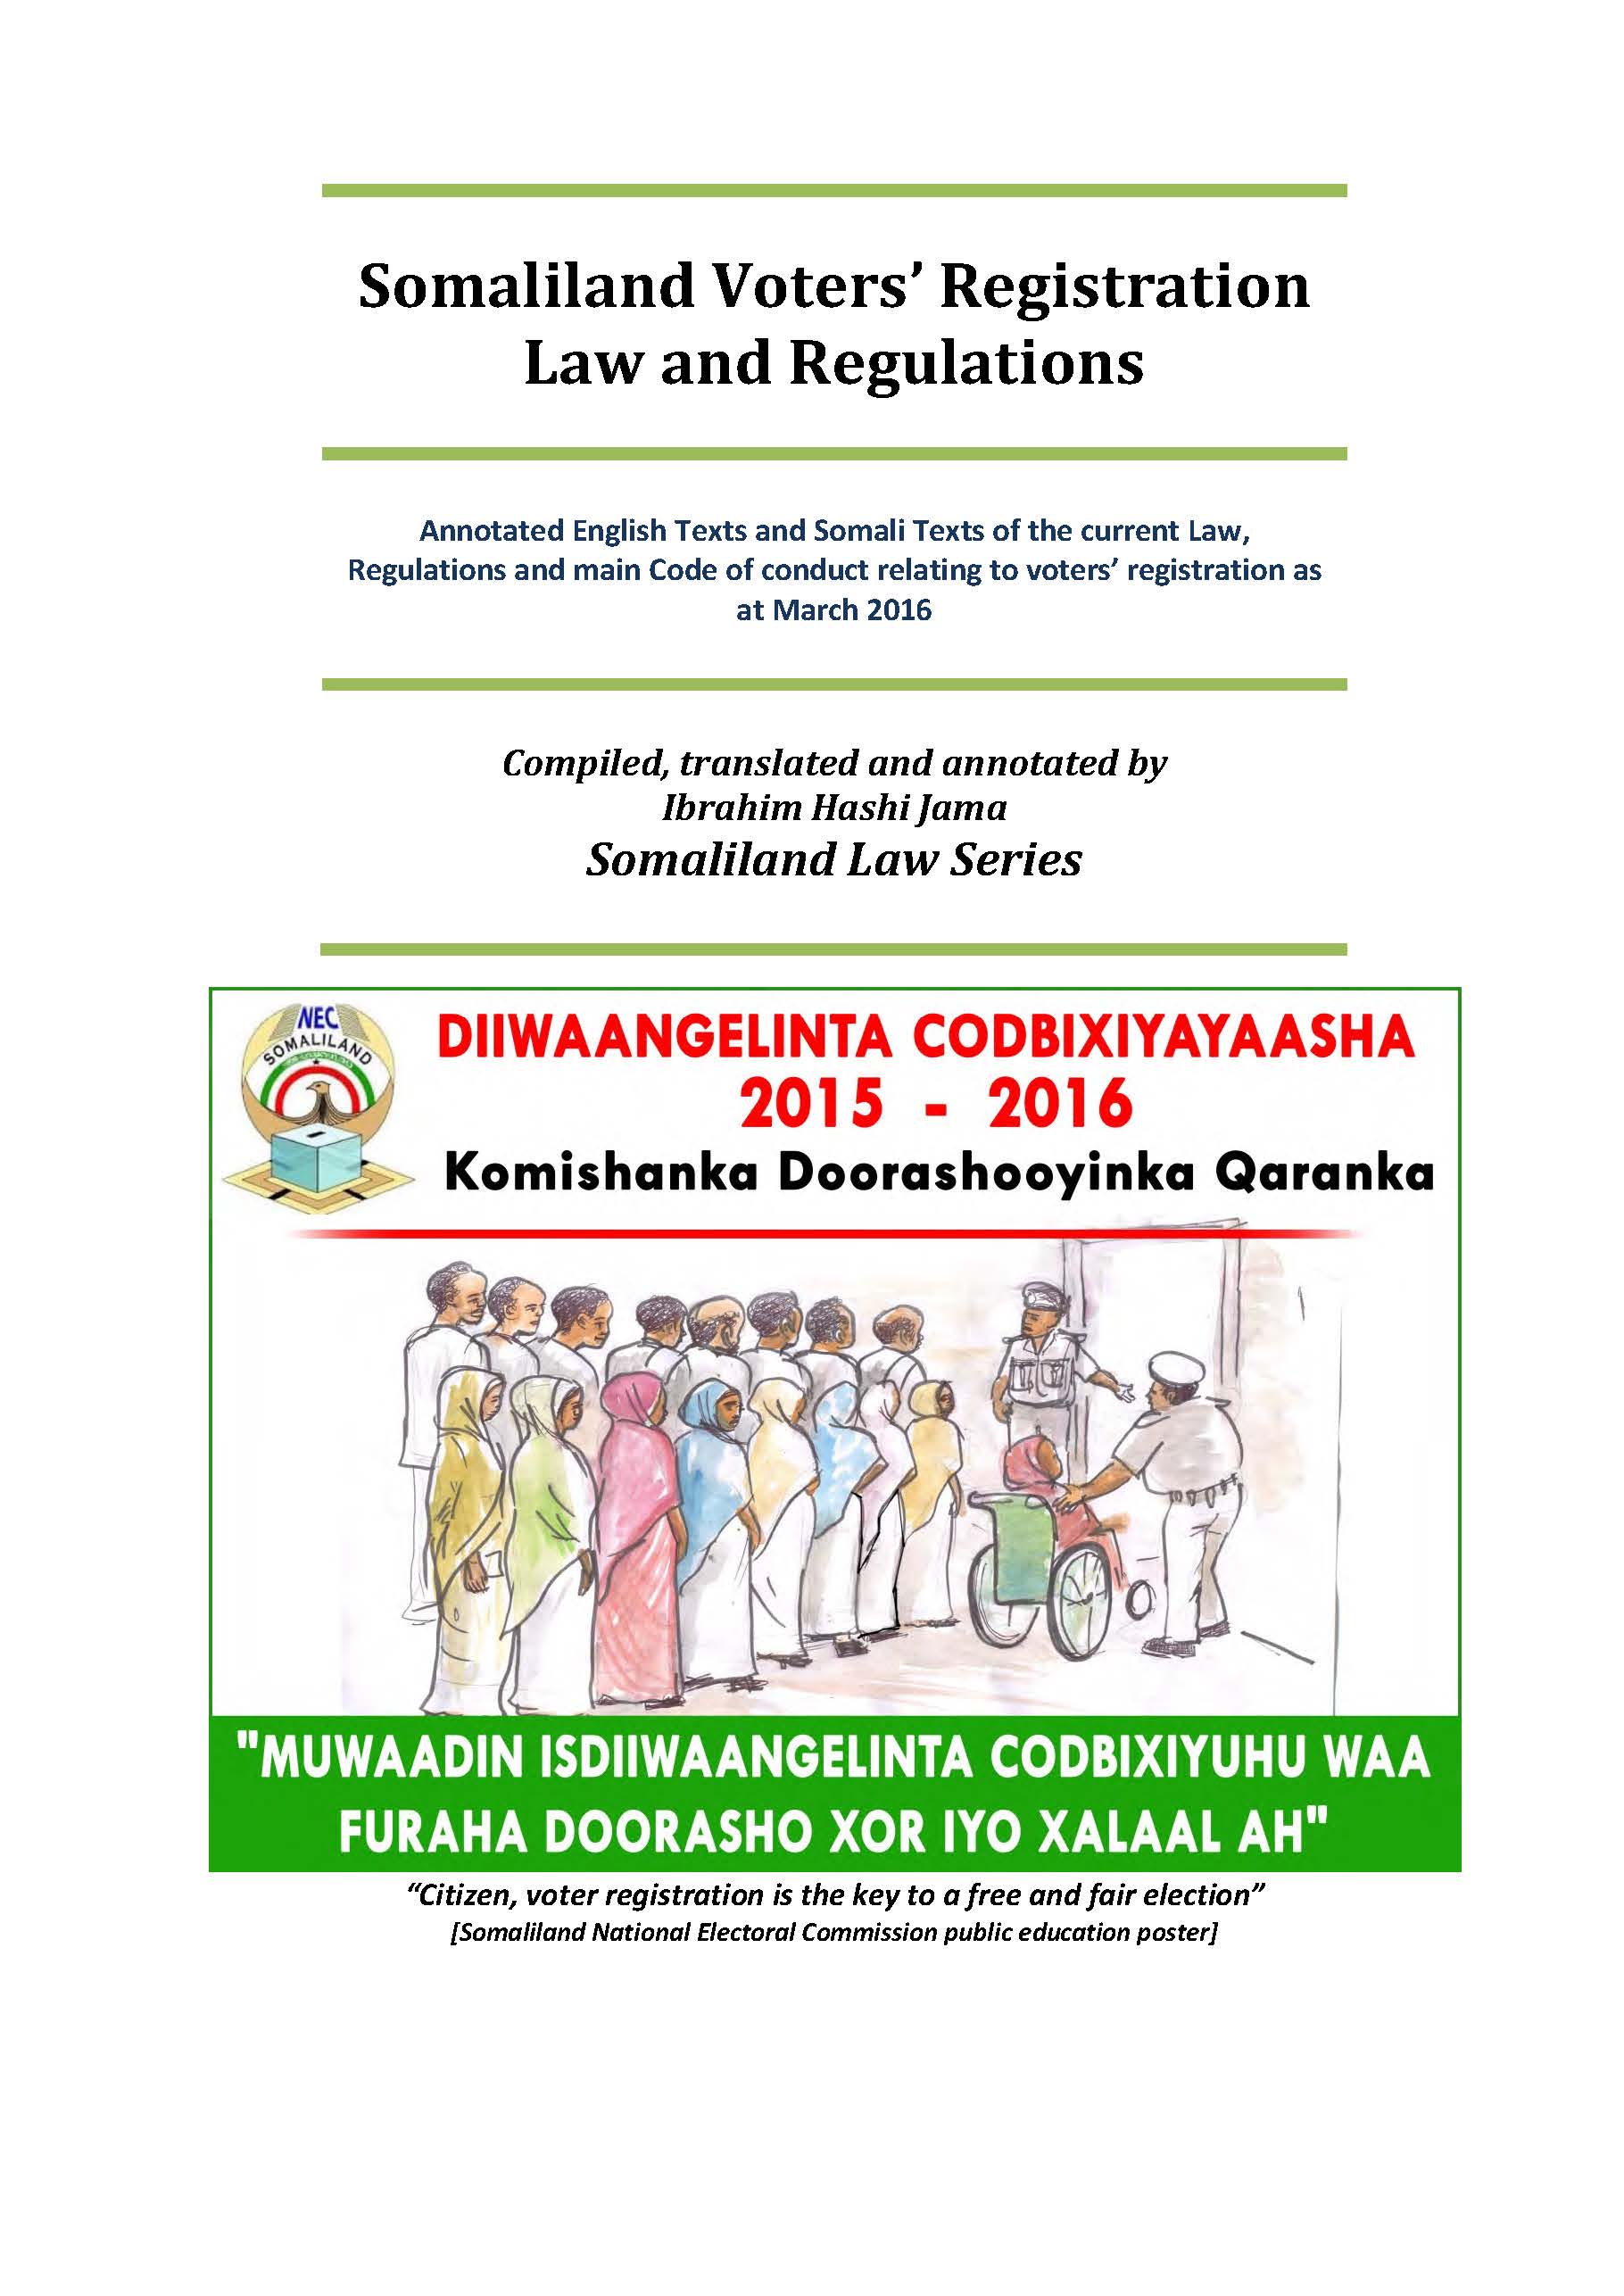 Somaliland VR Law & Regs Comp cover